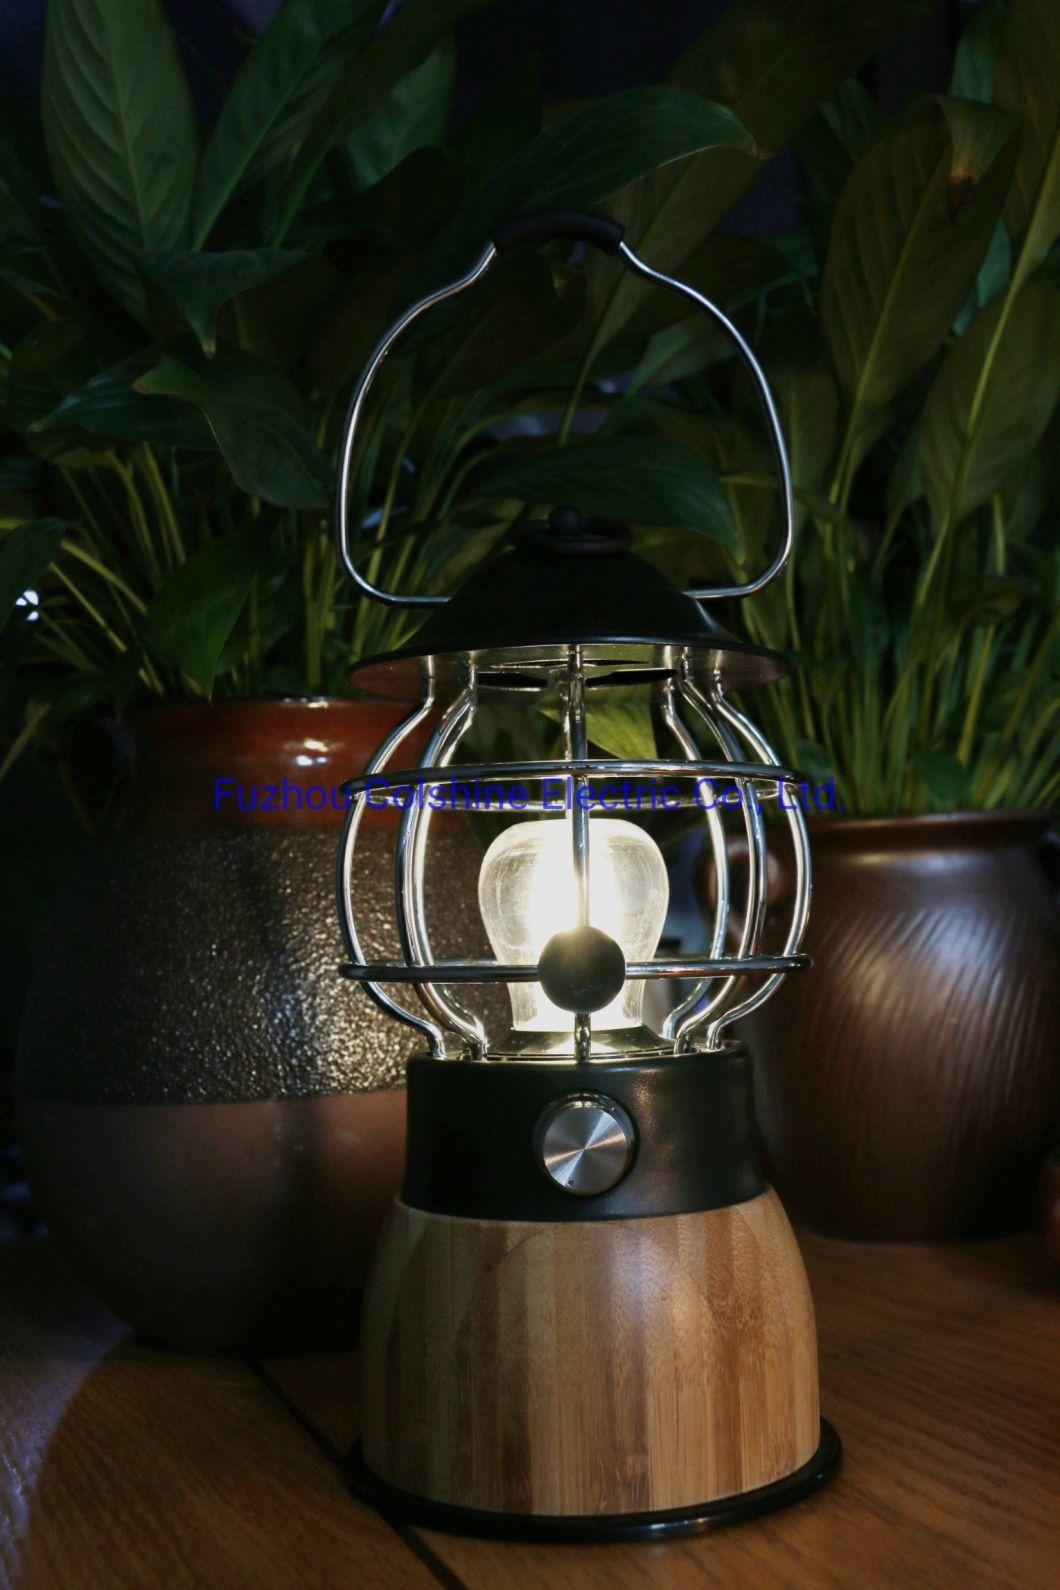 Bamboo Table Lamp Decorative Indoor Lamp with USB Powerbank